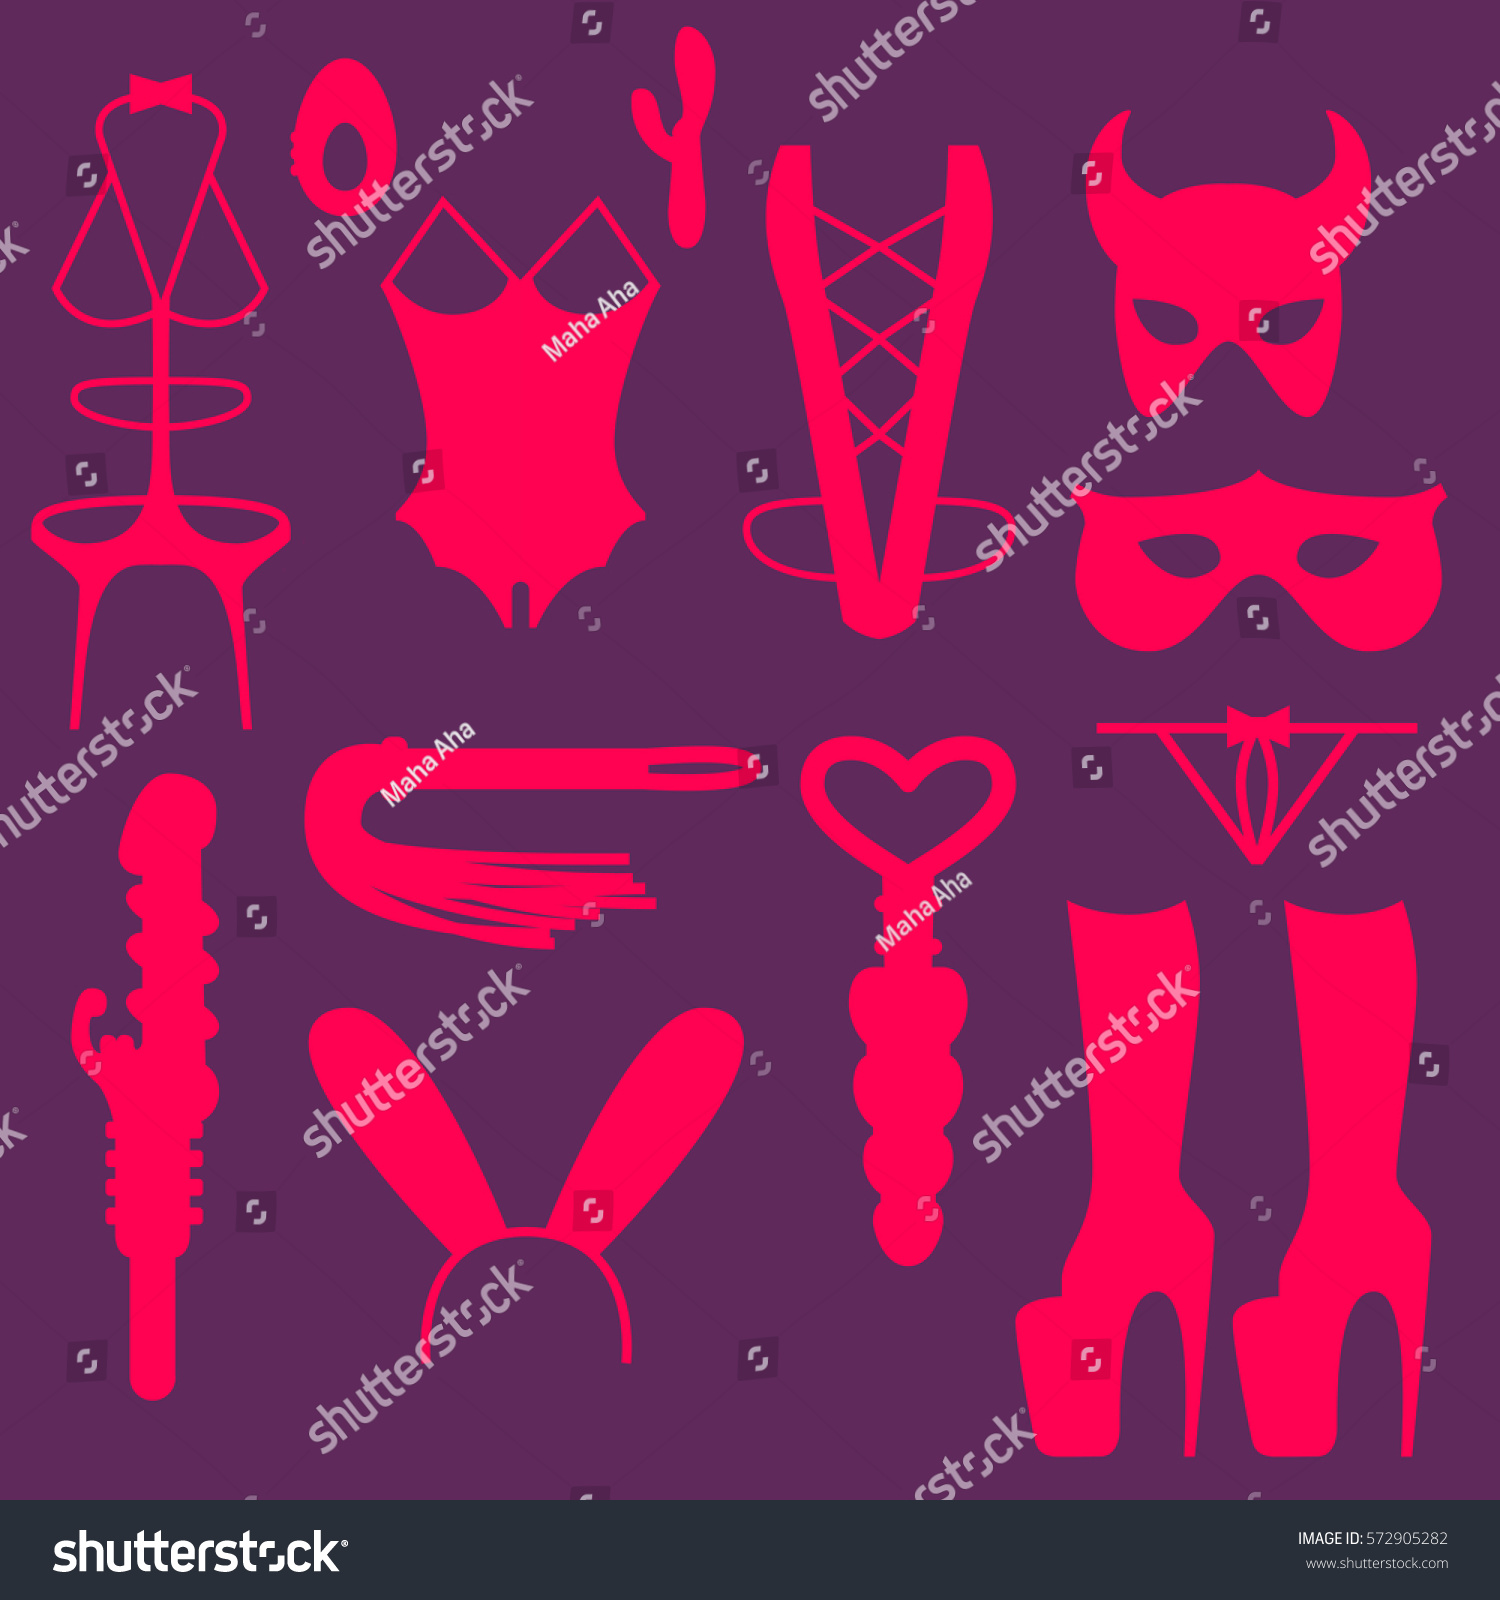 Adult Sex Toys Silhouettes Masks Laces Stock Vector Royalty Free 572905282 Shutterstock 3184